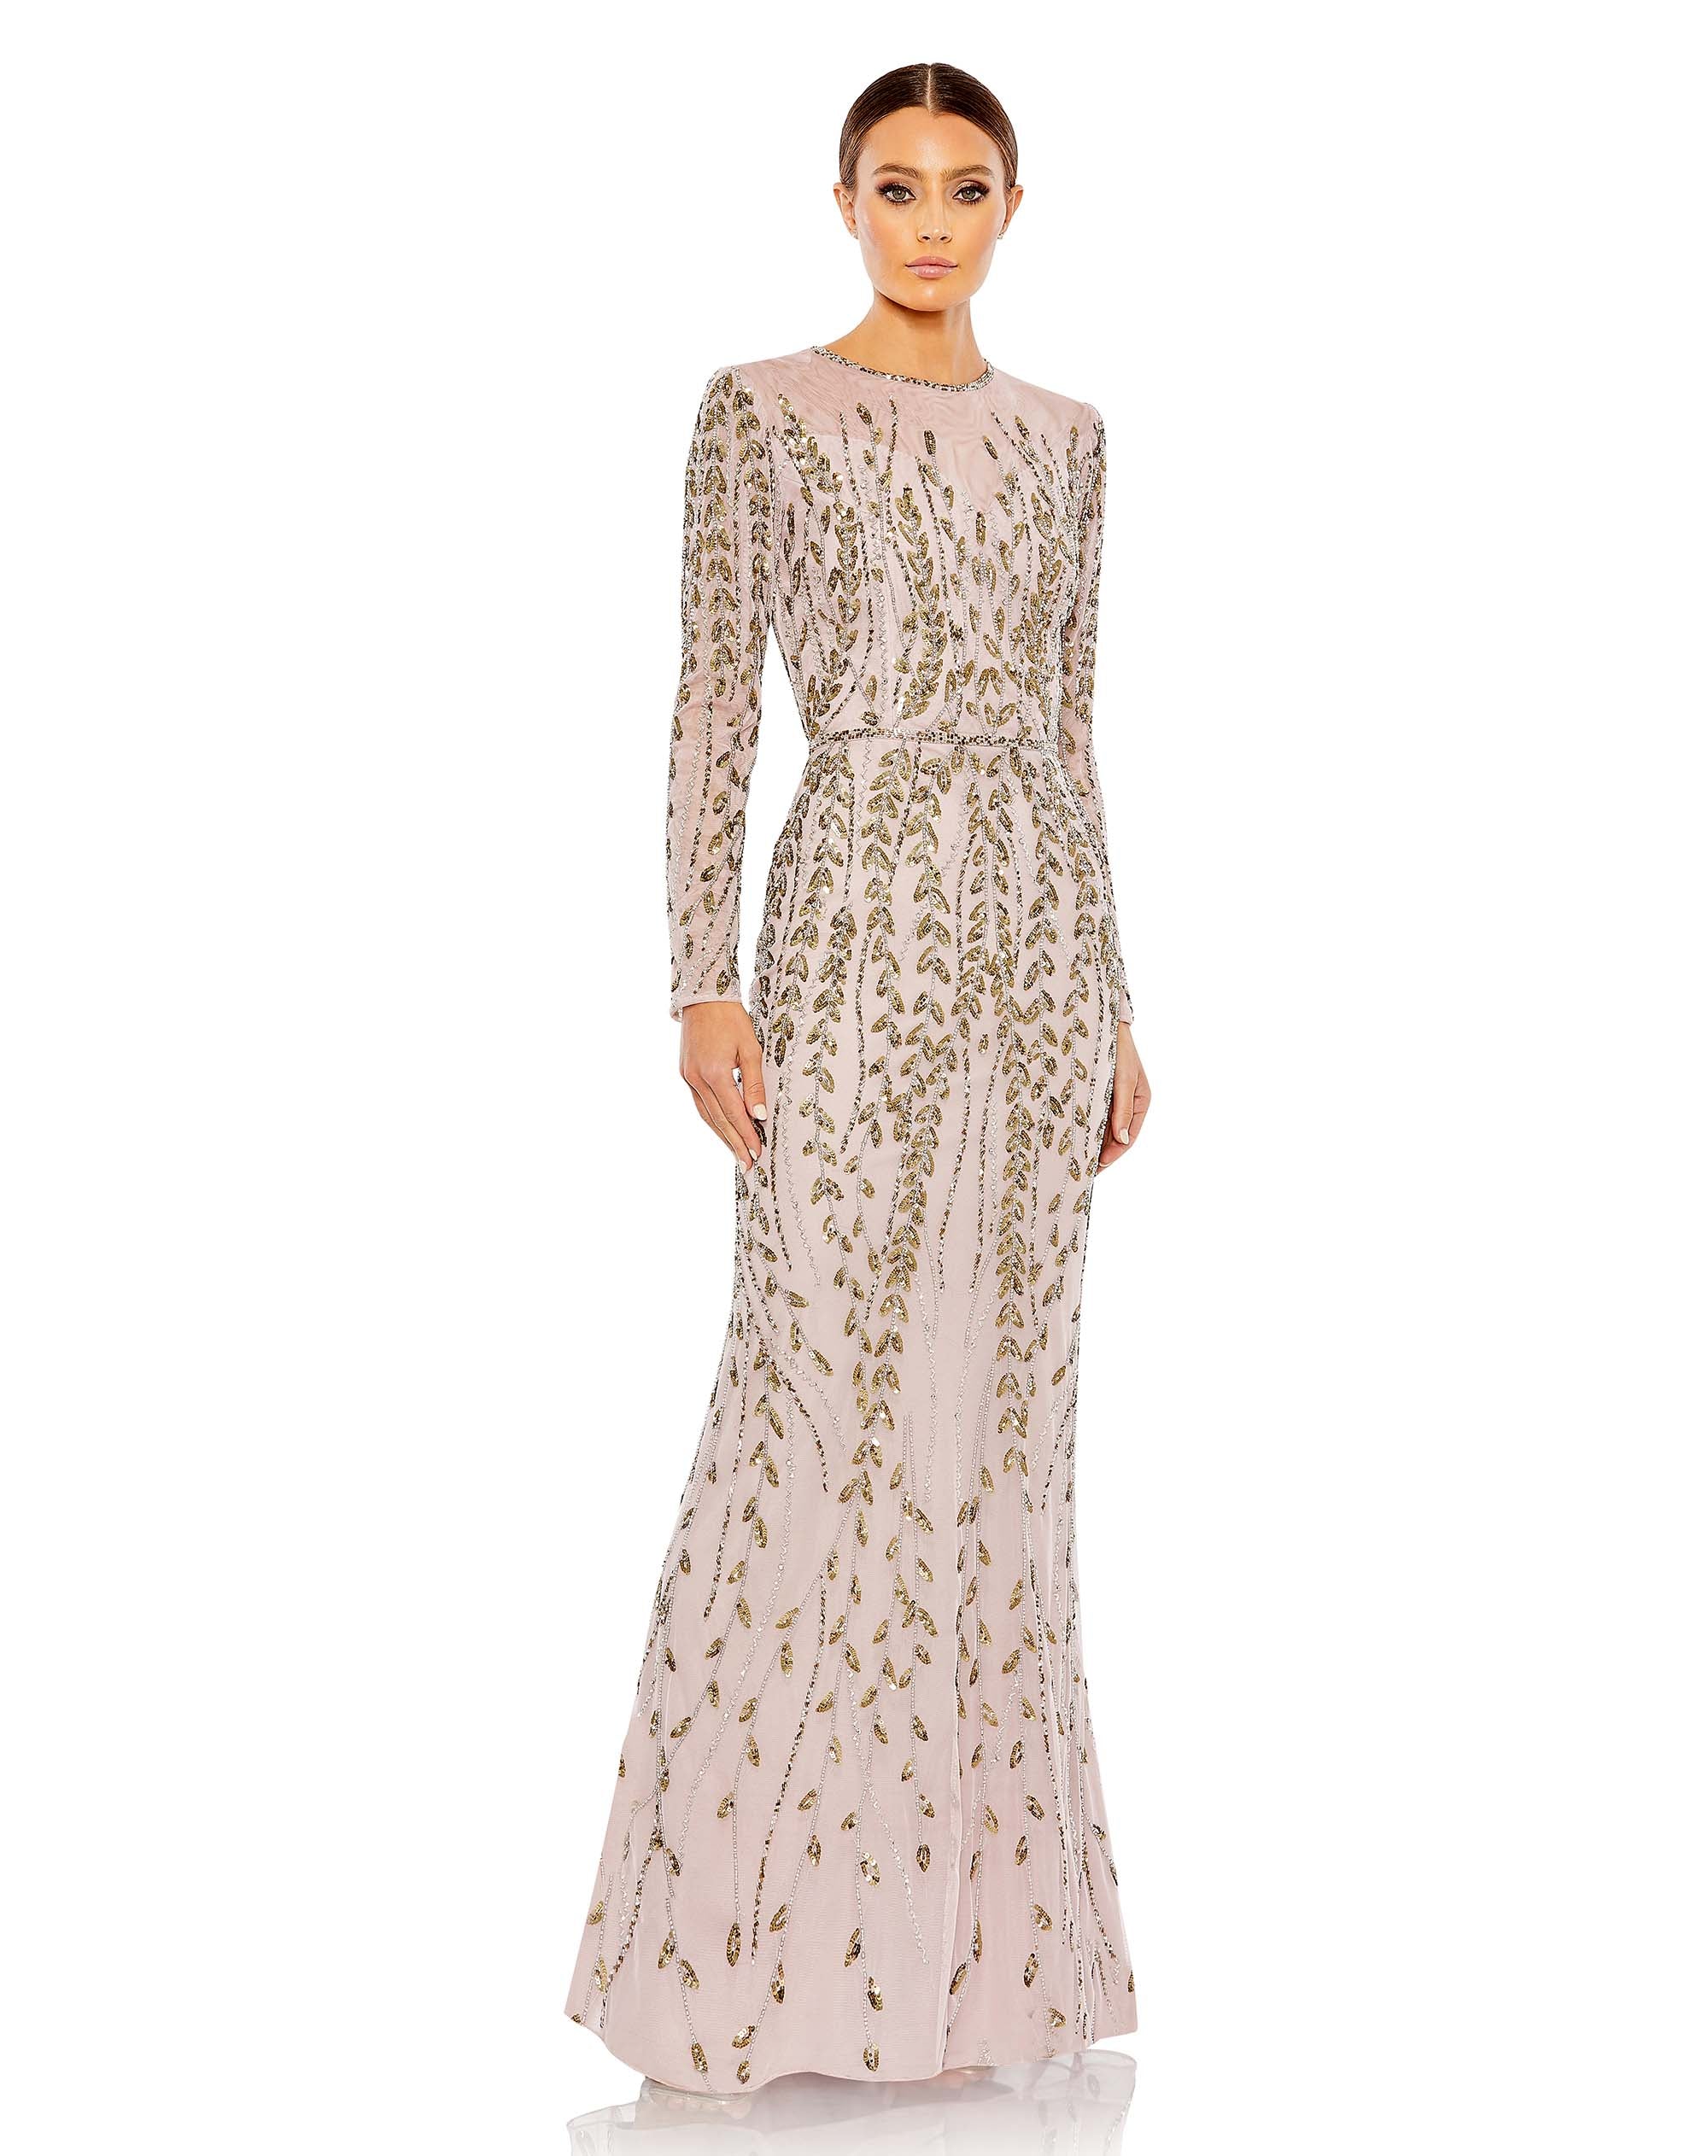 Embellished Illusion High Neck Long Sleeve Gown